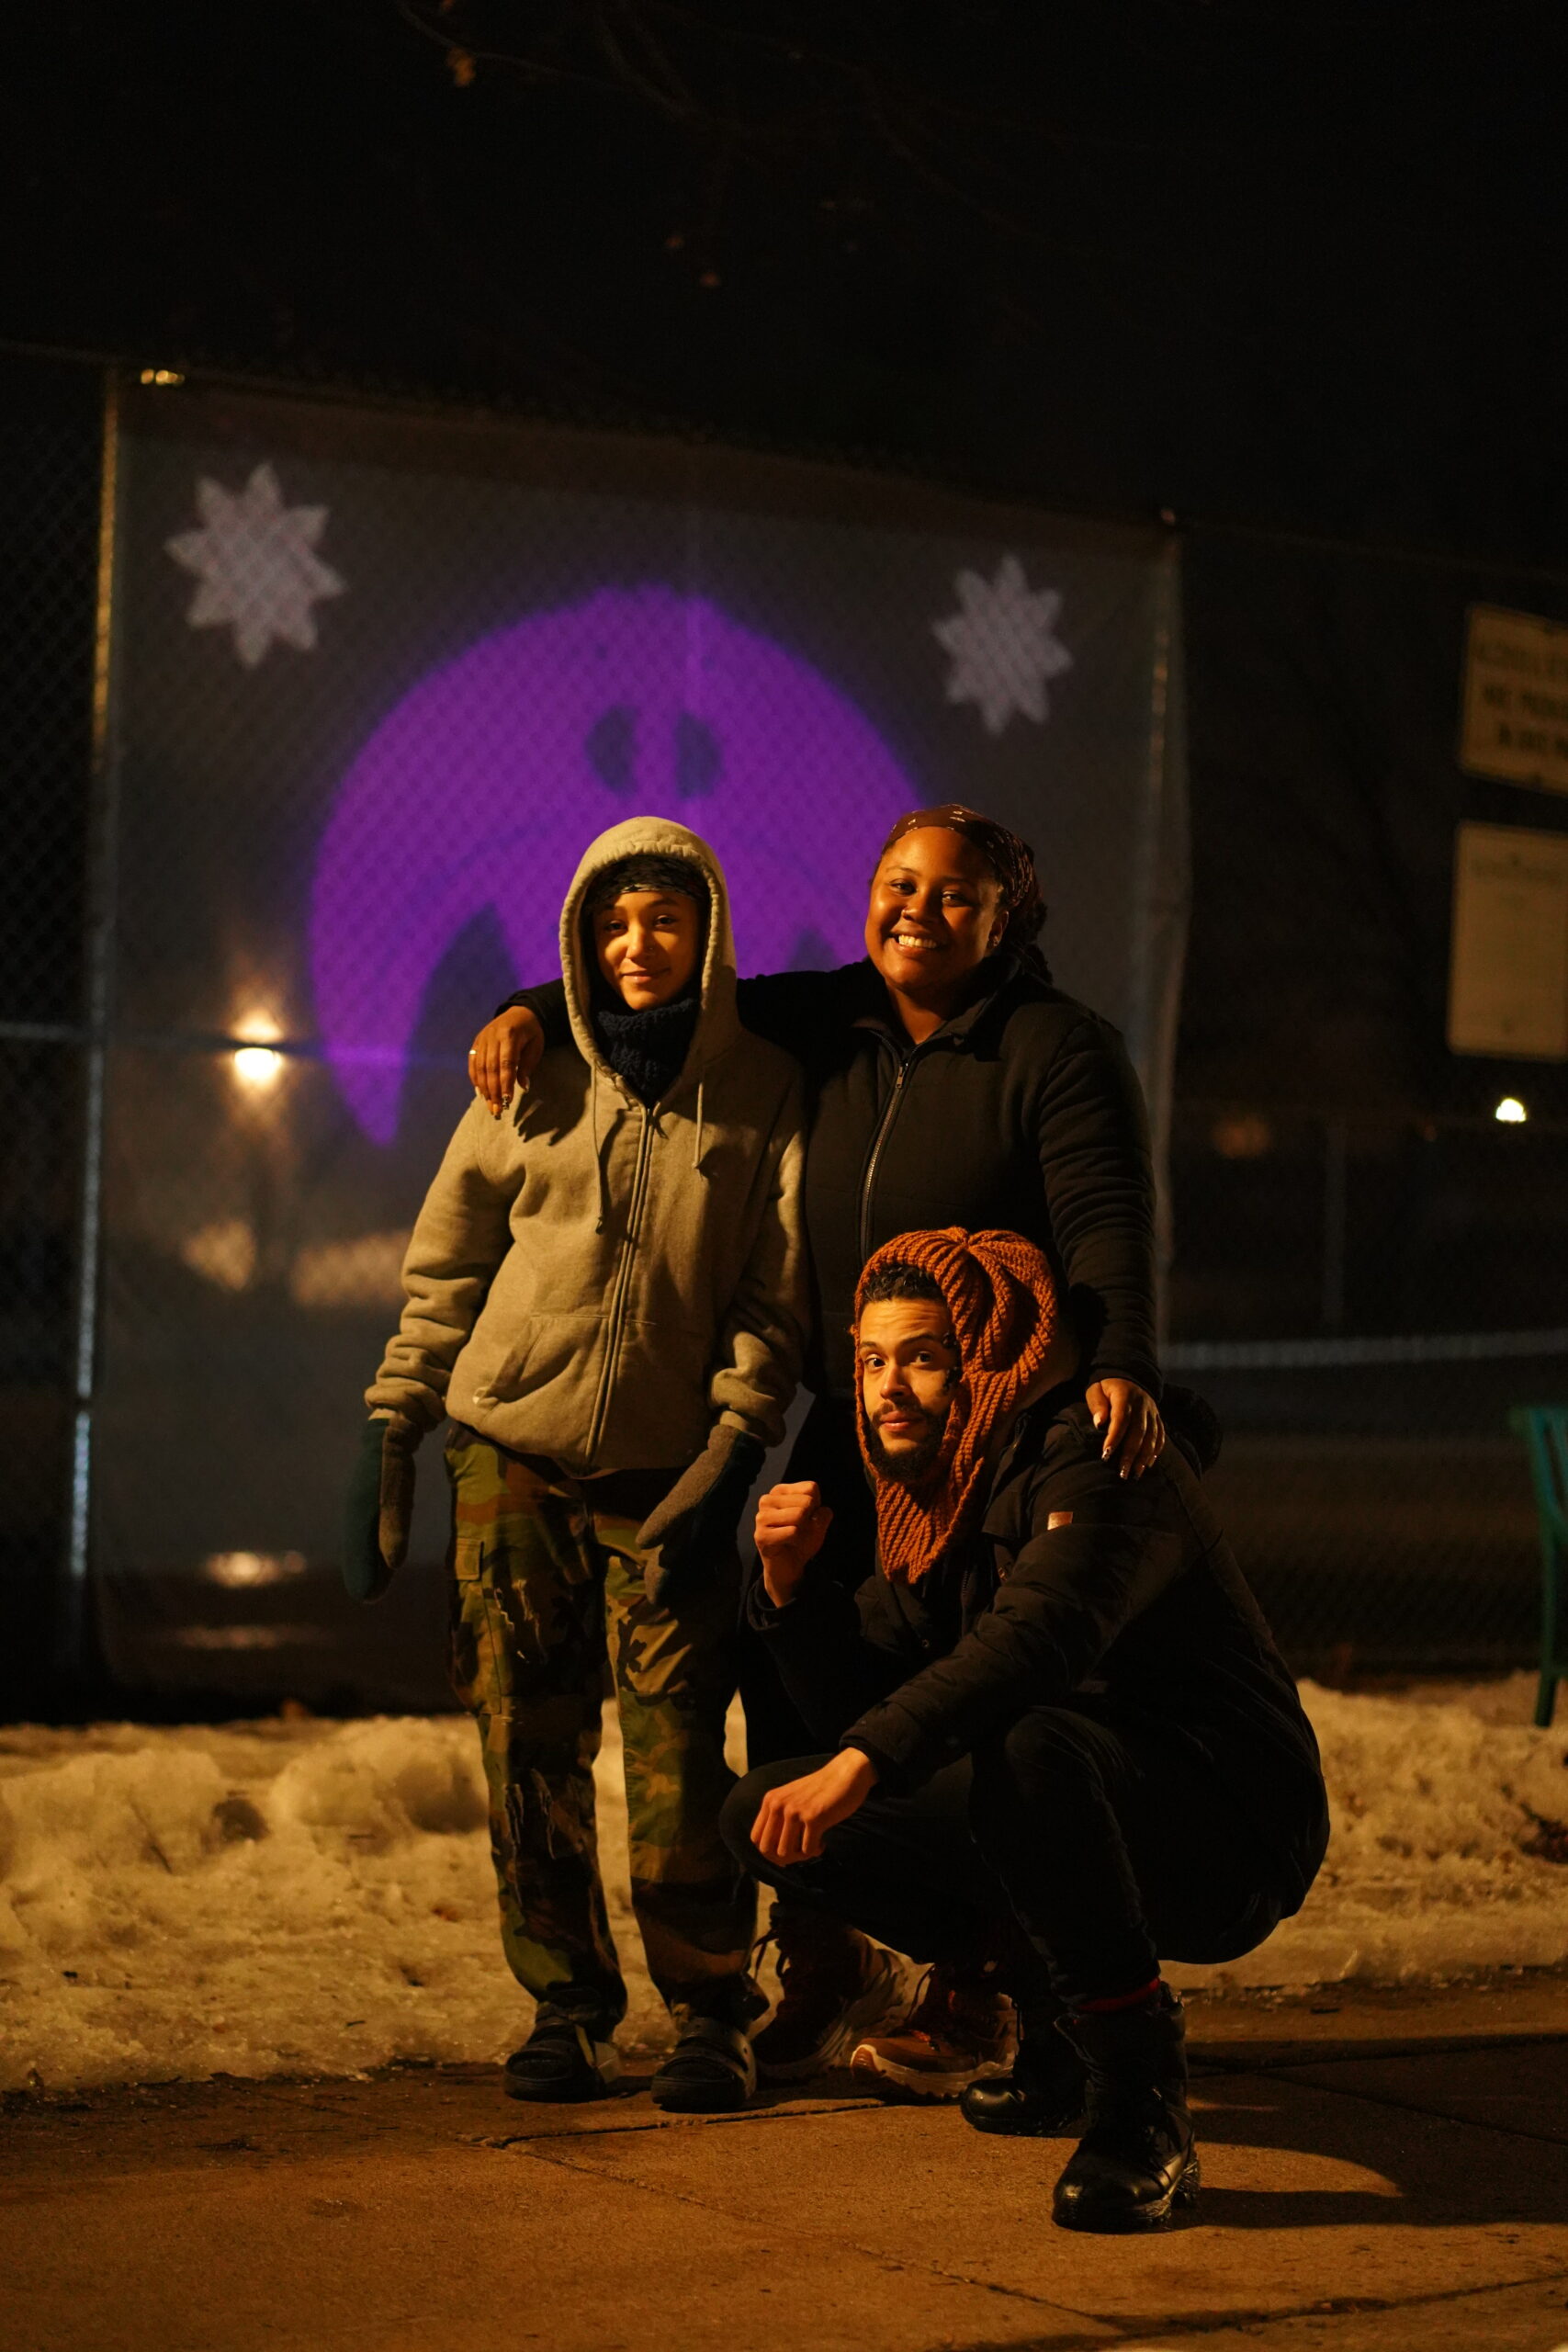 Three people in warm clothing stand with their arms around each other in front of projection on chain link fence.